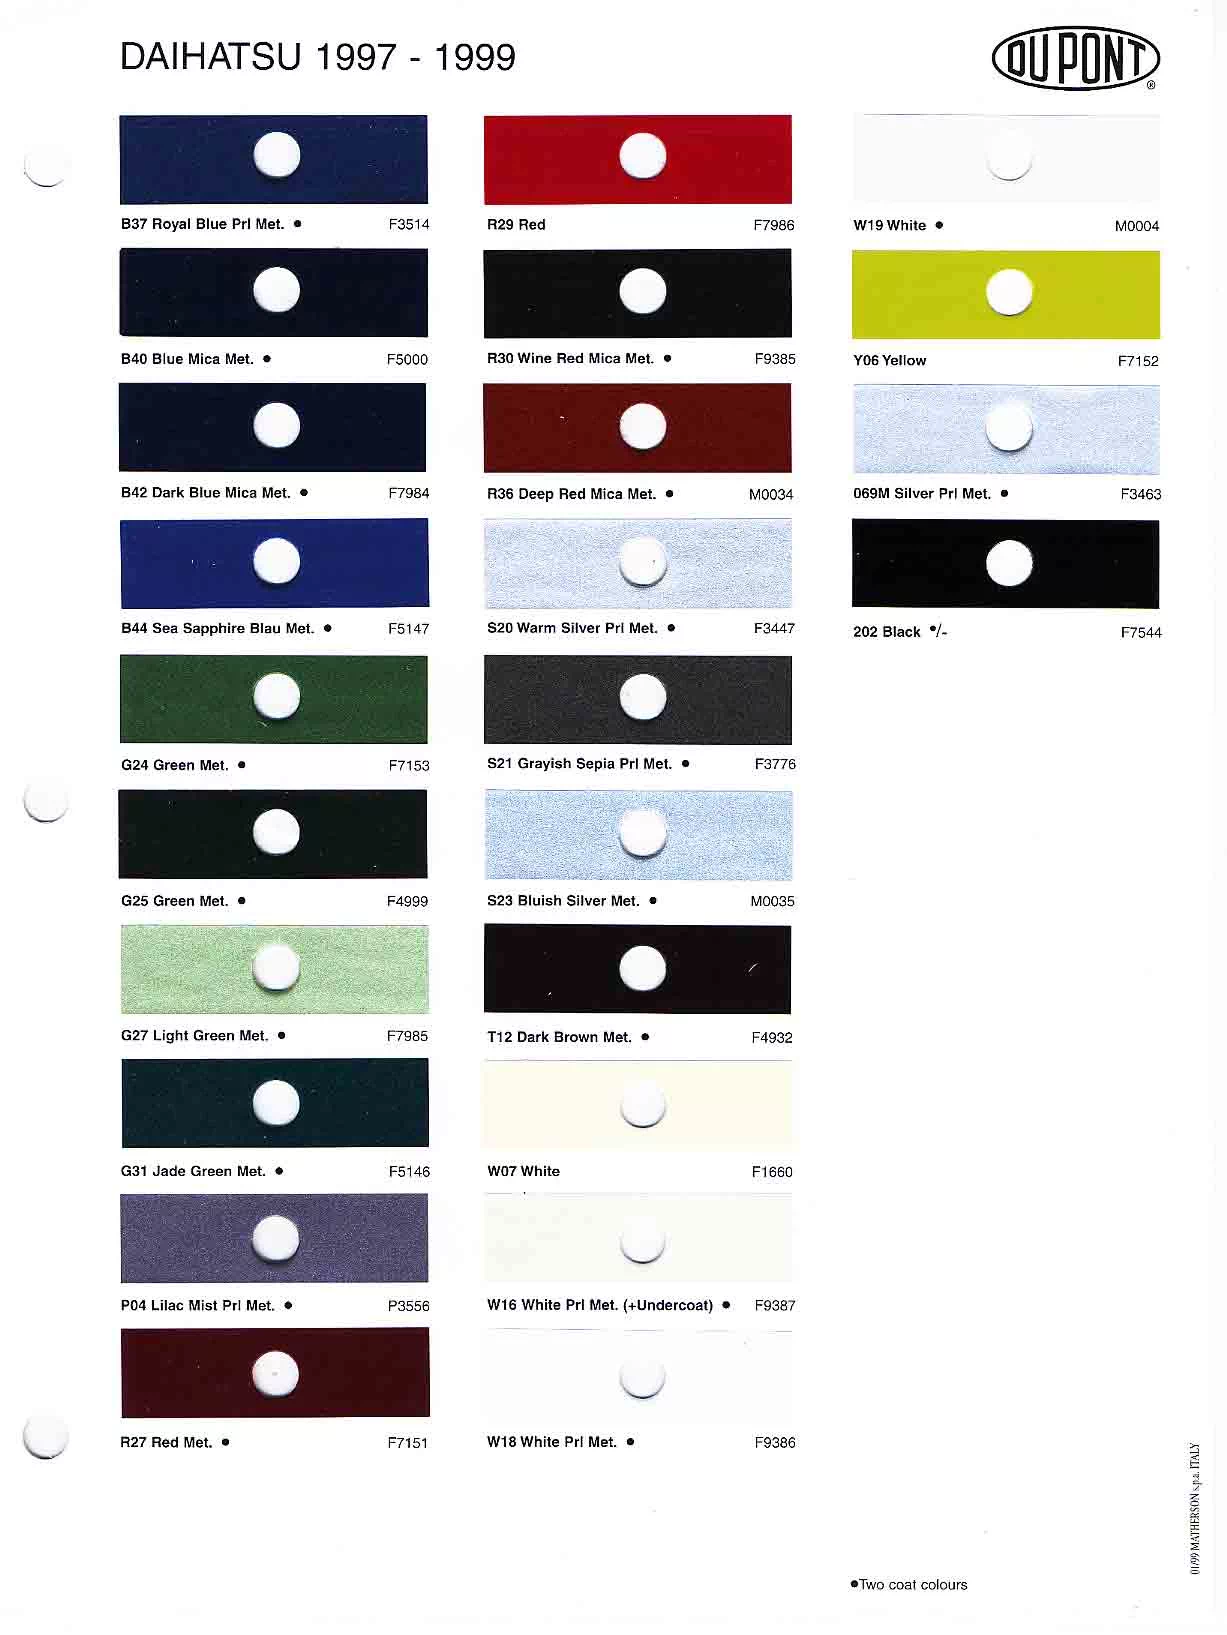 a photo showing Daihatsu exterior vehicle colors, their ordering codes, and their mixing stock numbers